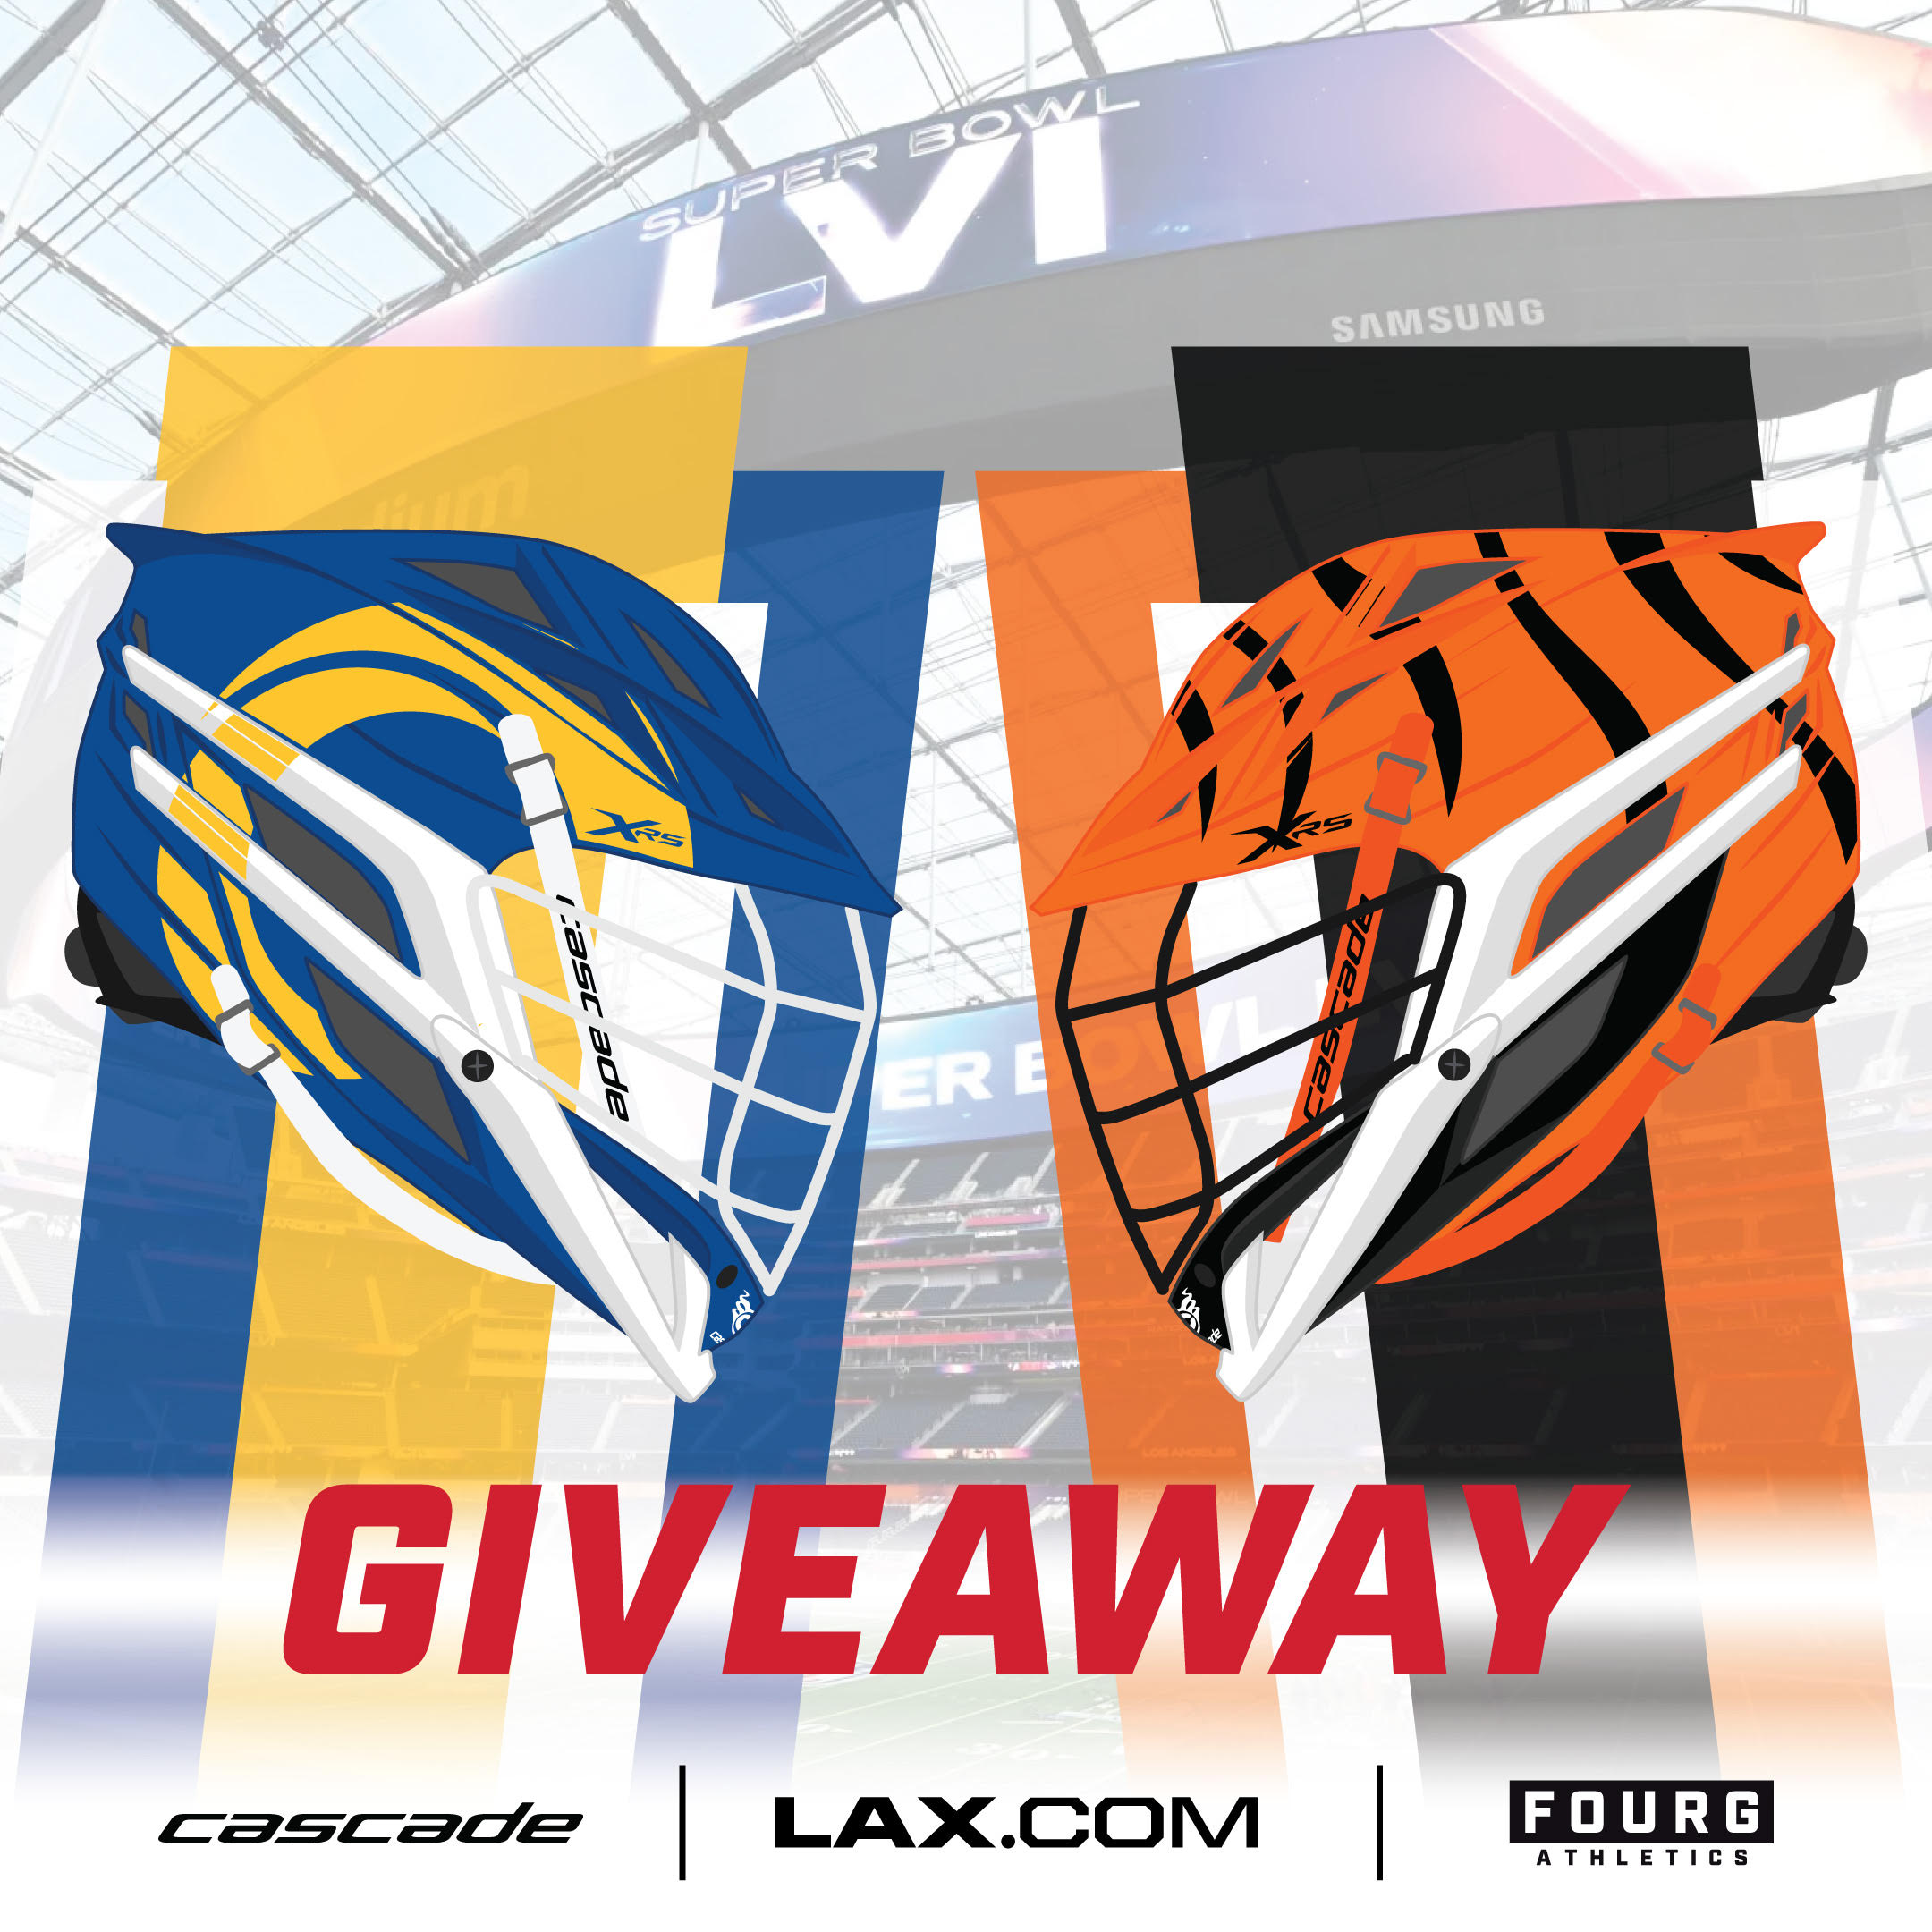 Super Sunday Giveaway Lacrosse Video